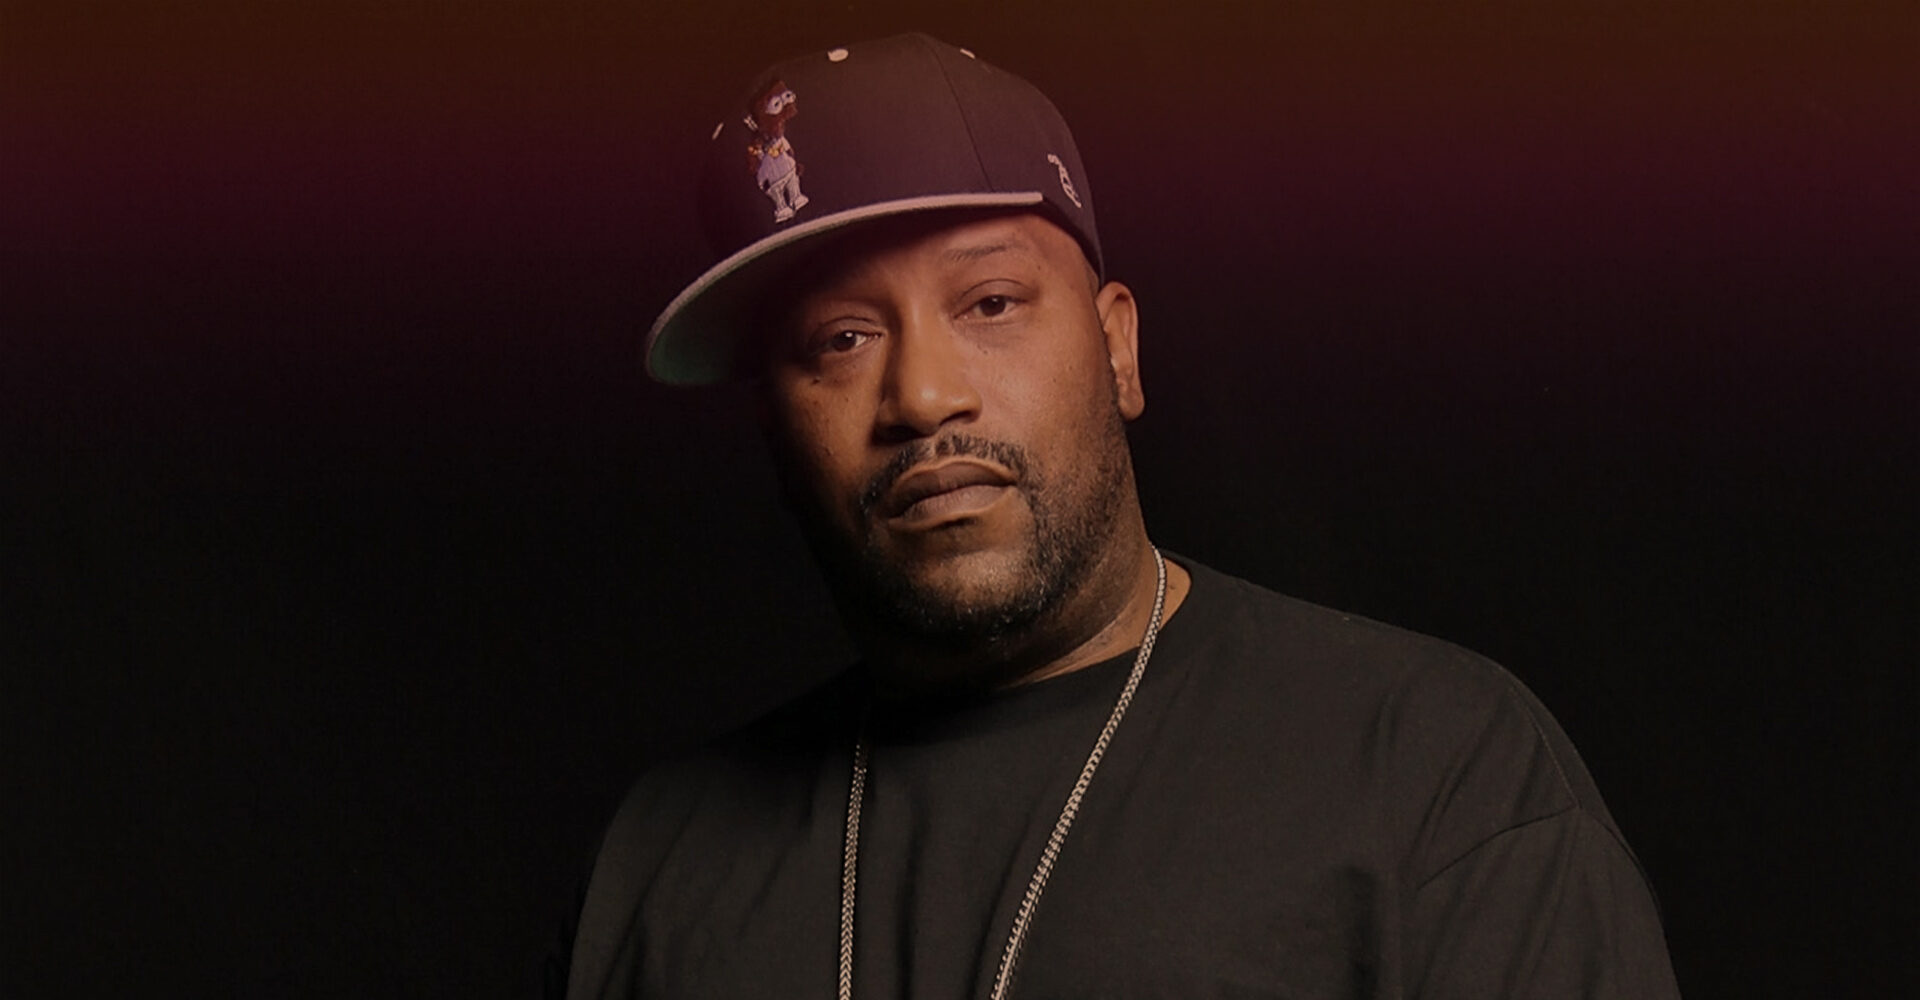 Rapper Bun B will drive for Ignition Casino in the Gumball 3000 rally.